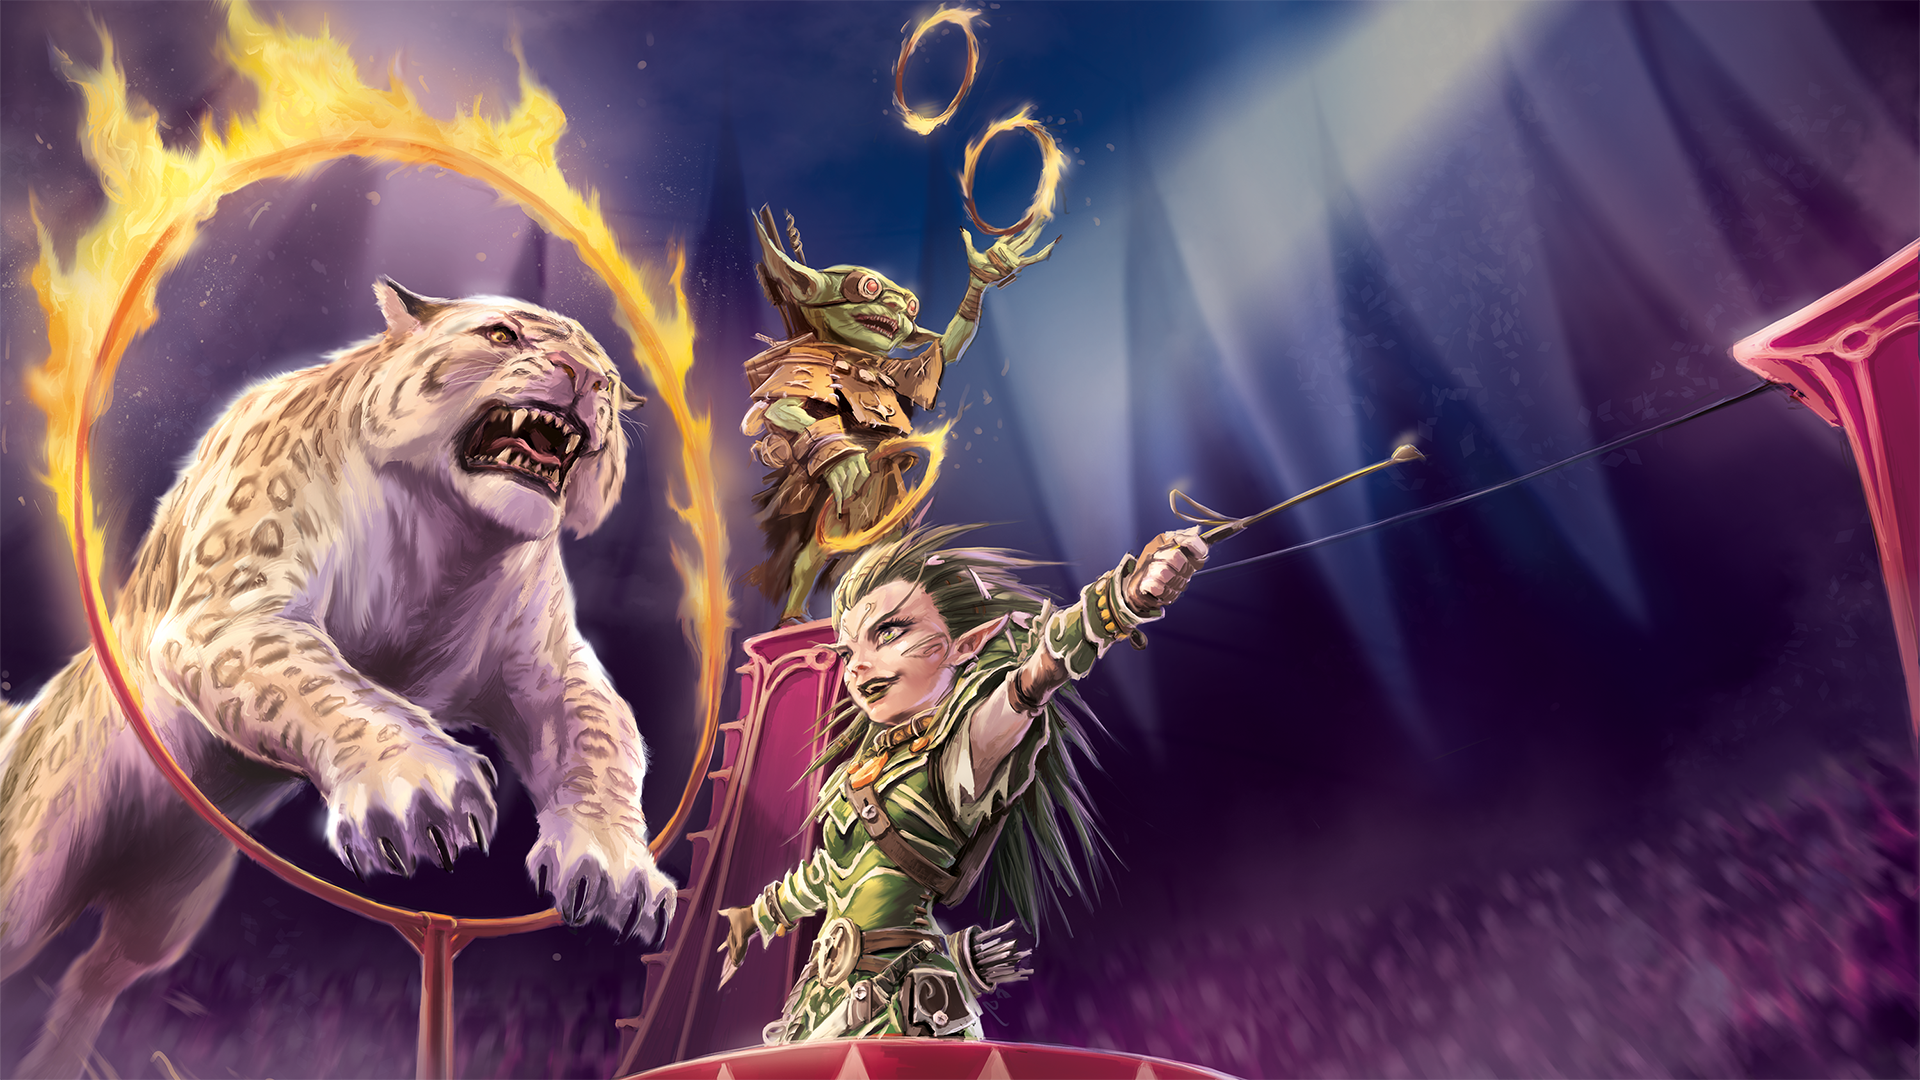 Iconic druid Lini, a green haired gnome, holds her arms out to show off a large snow leopard jumping through a flaming hoop. In the background, goblin alchemist, Fumbus, juggles much smaller flaming hoops